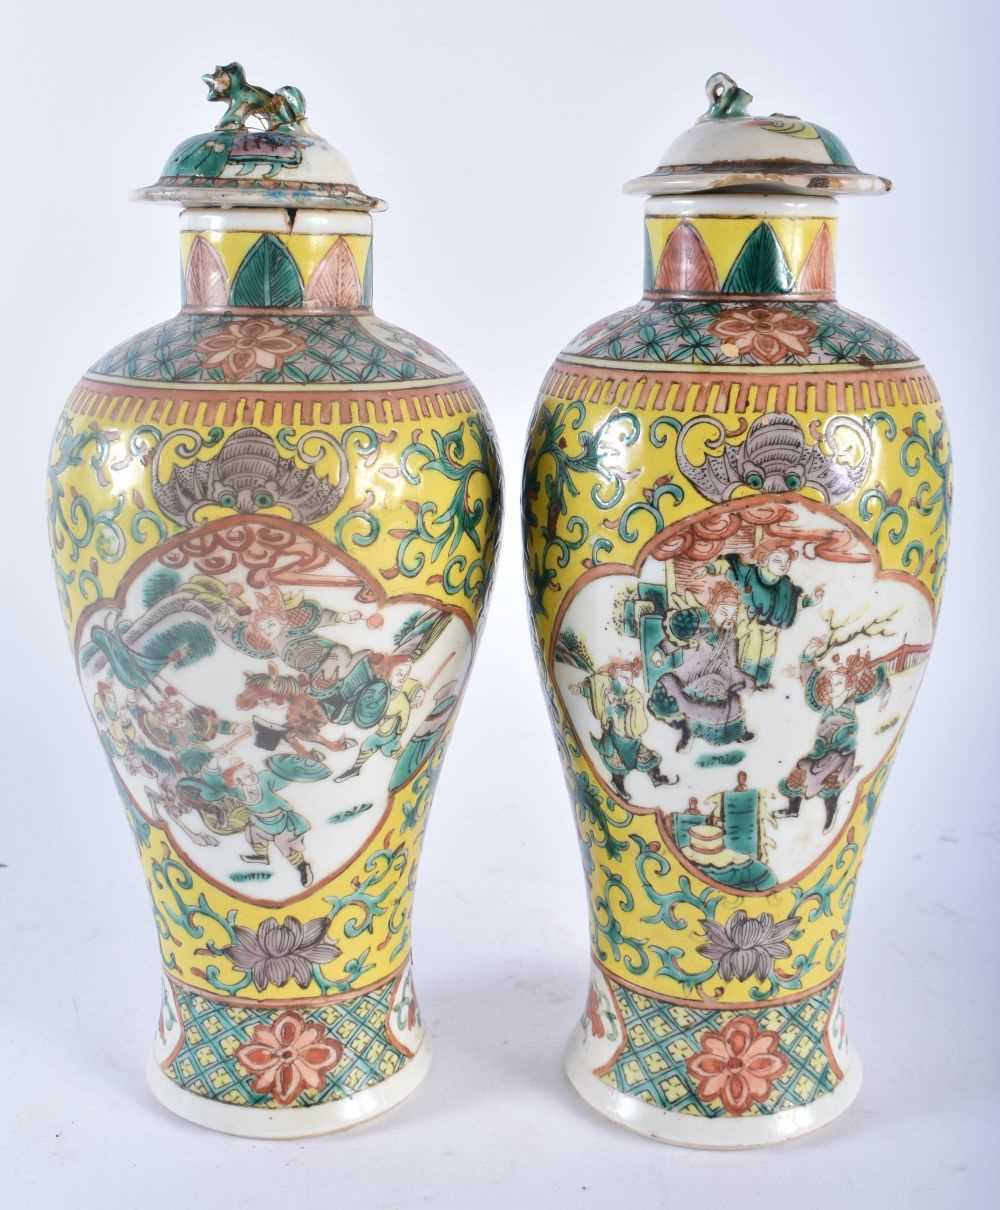 A PAIR OF 19TH CENTURY CHINESE FAMILLE JAUNE PORCELAIN VASES AND COVERS Qing, painted with figures